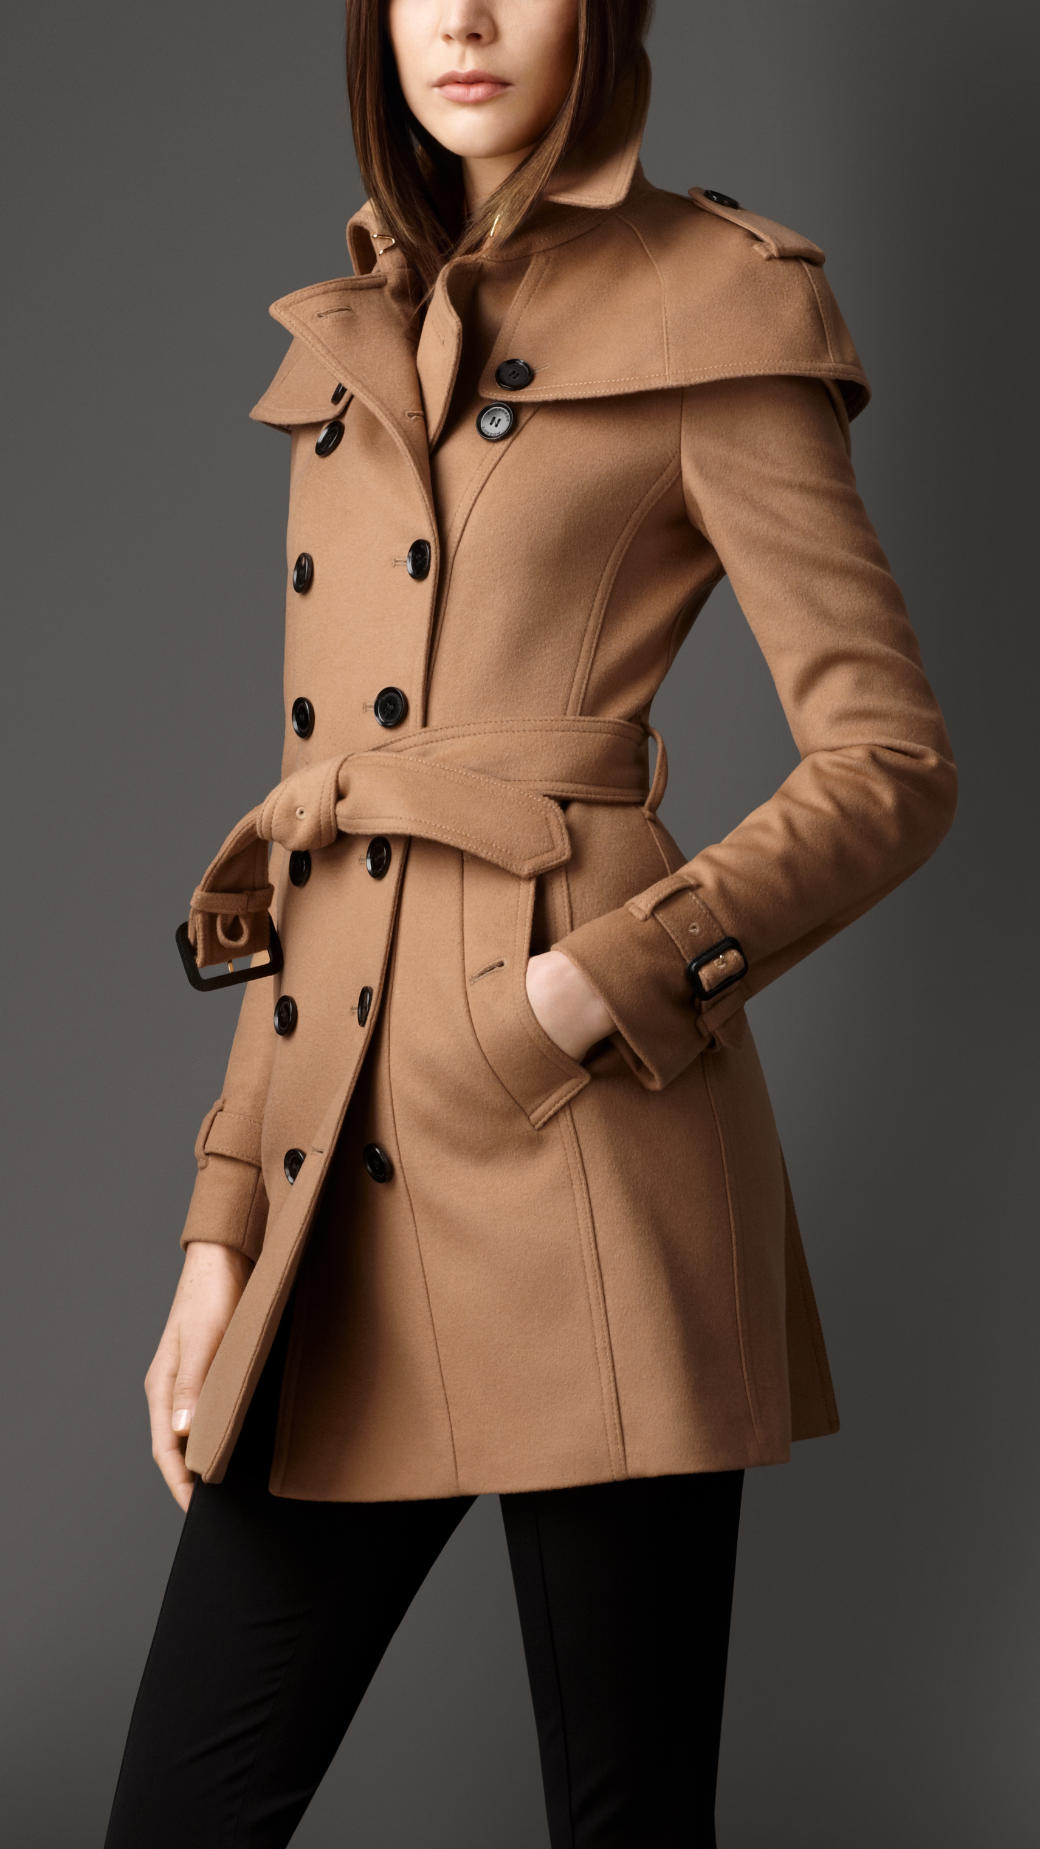 Burberry Wool Cashmere Trench Coat Camel - Buy burberry women's natural ...